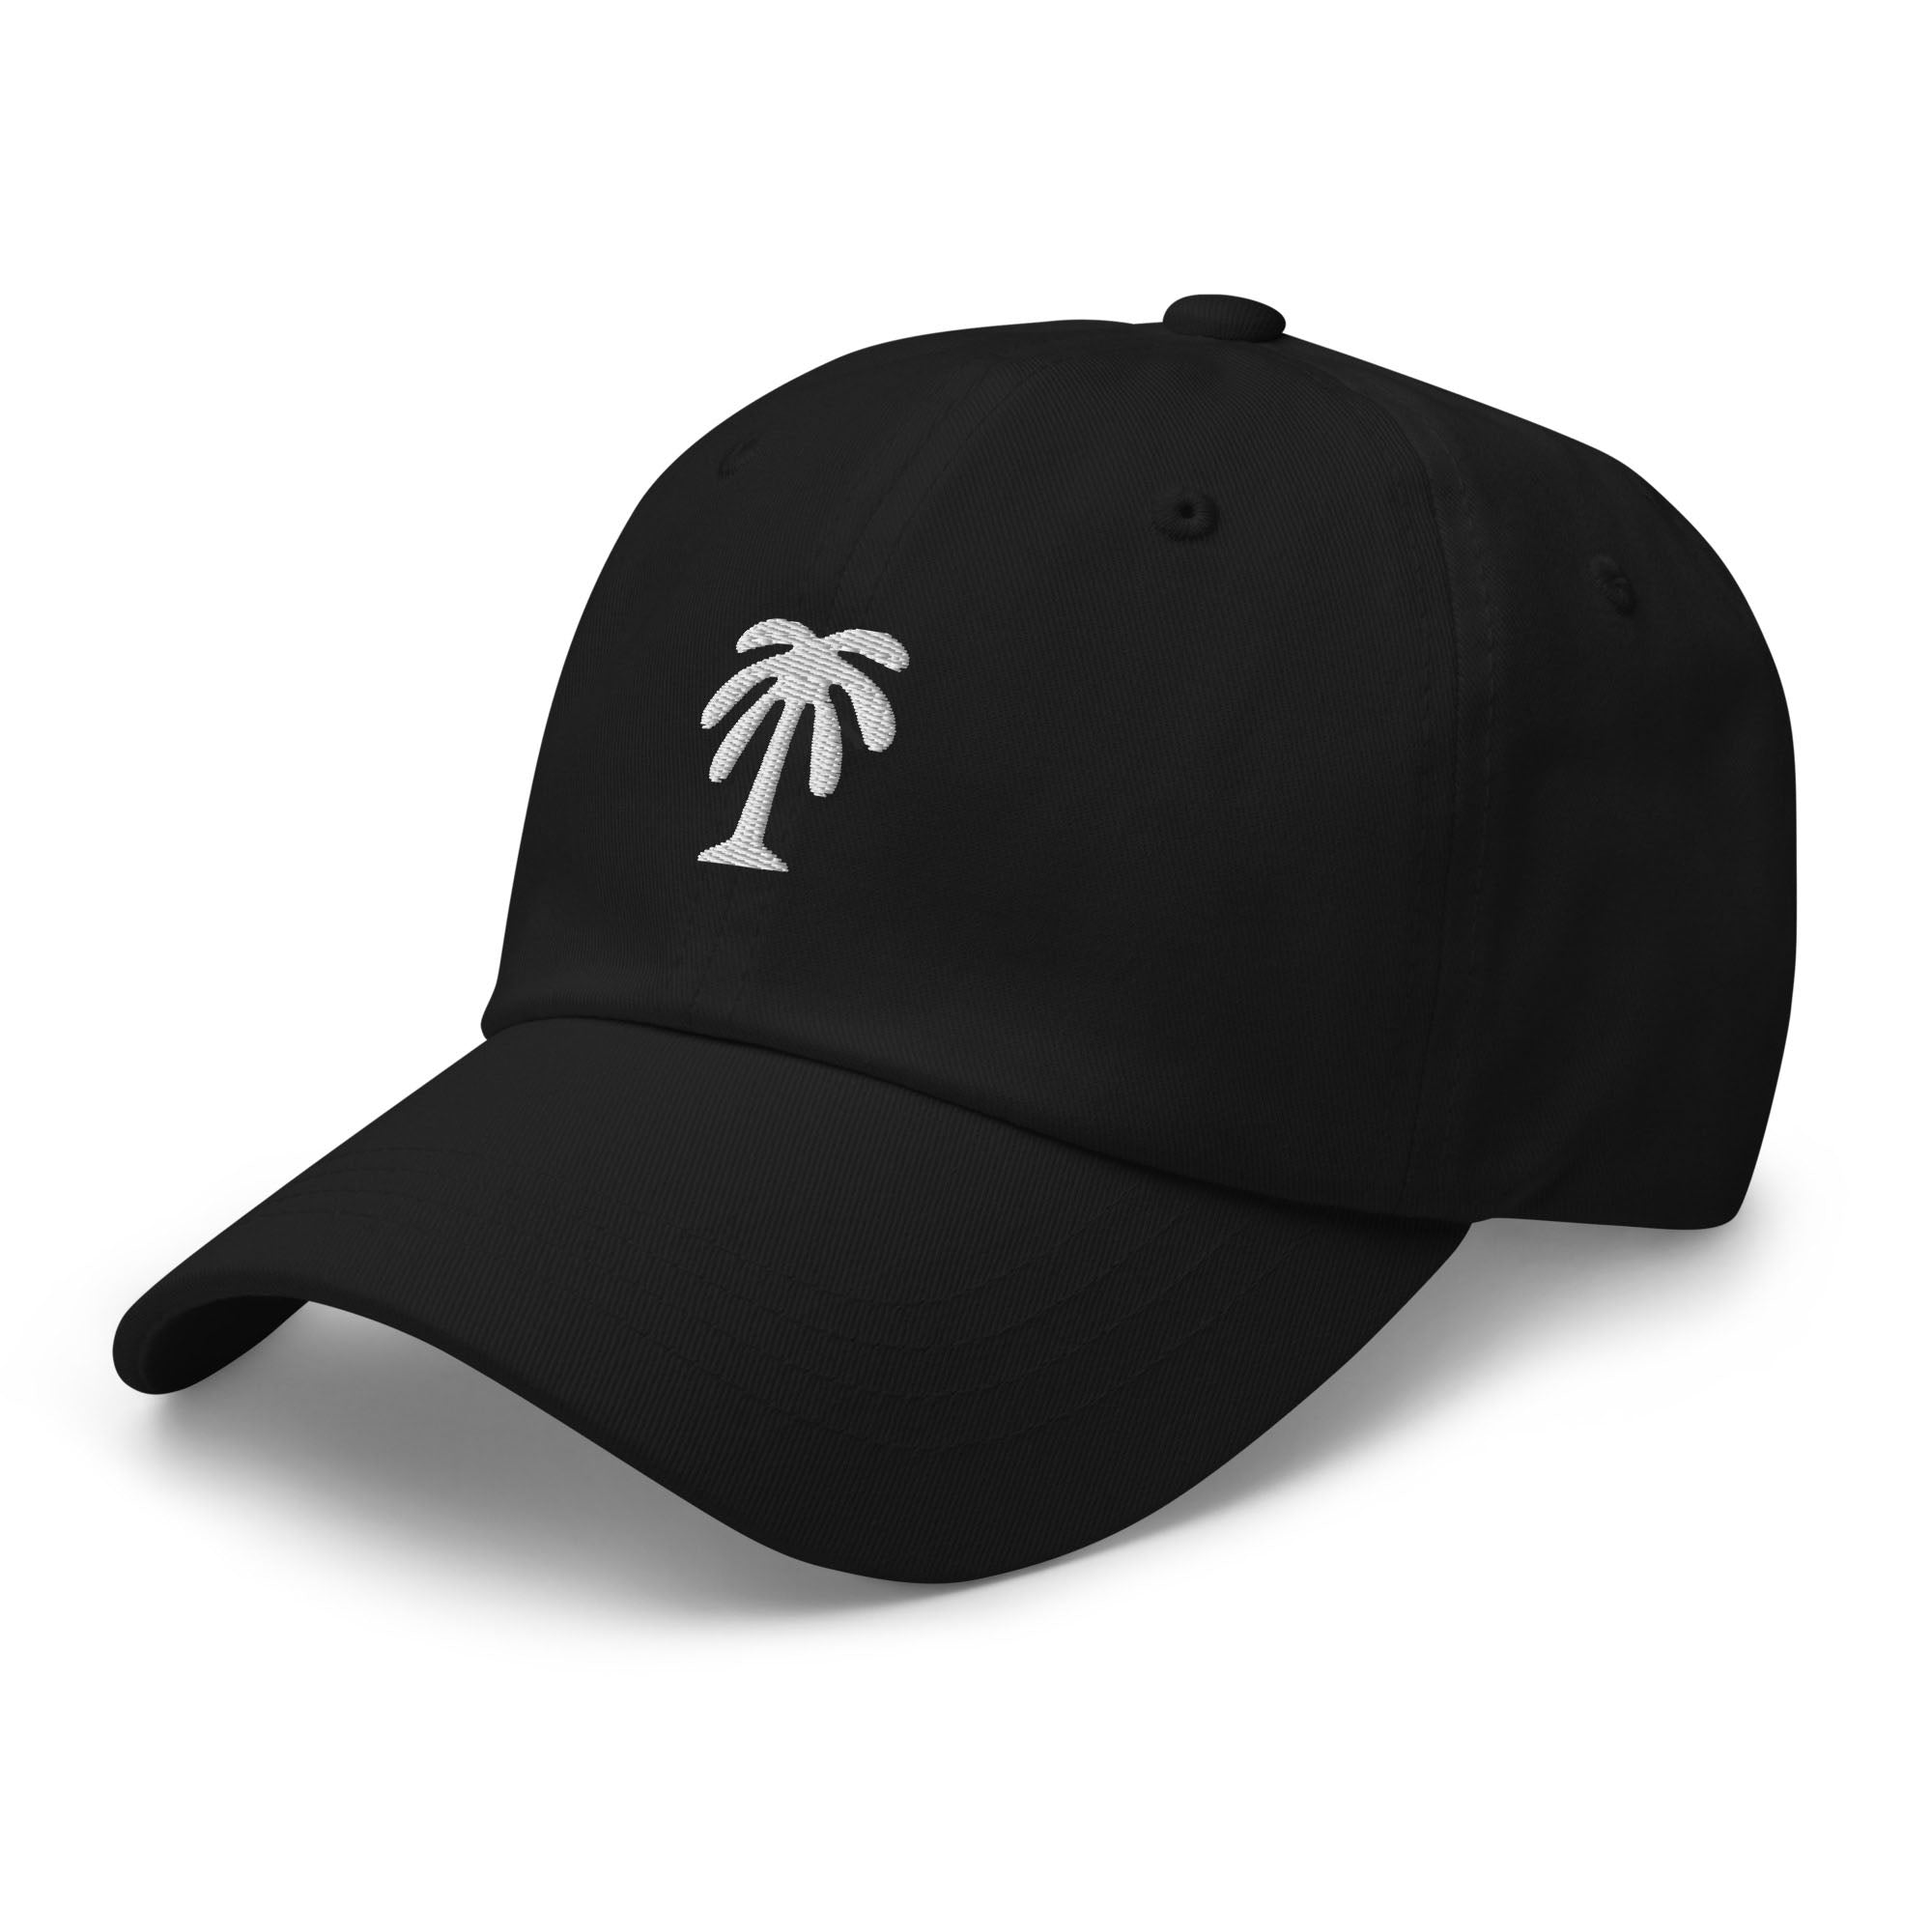 The James Dad Hat